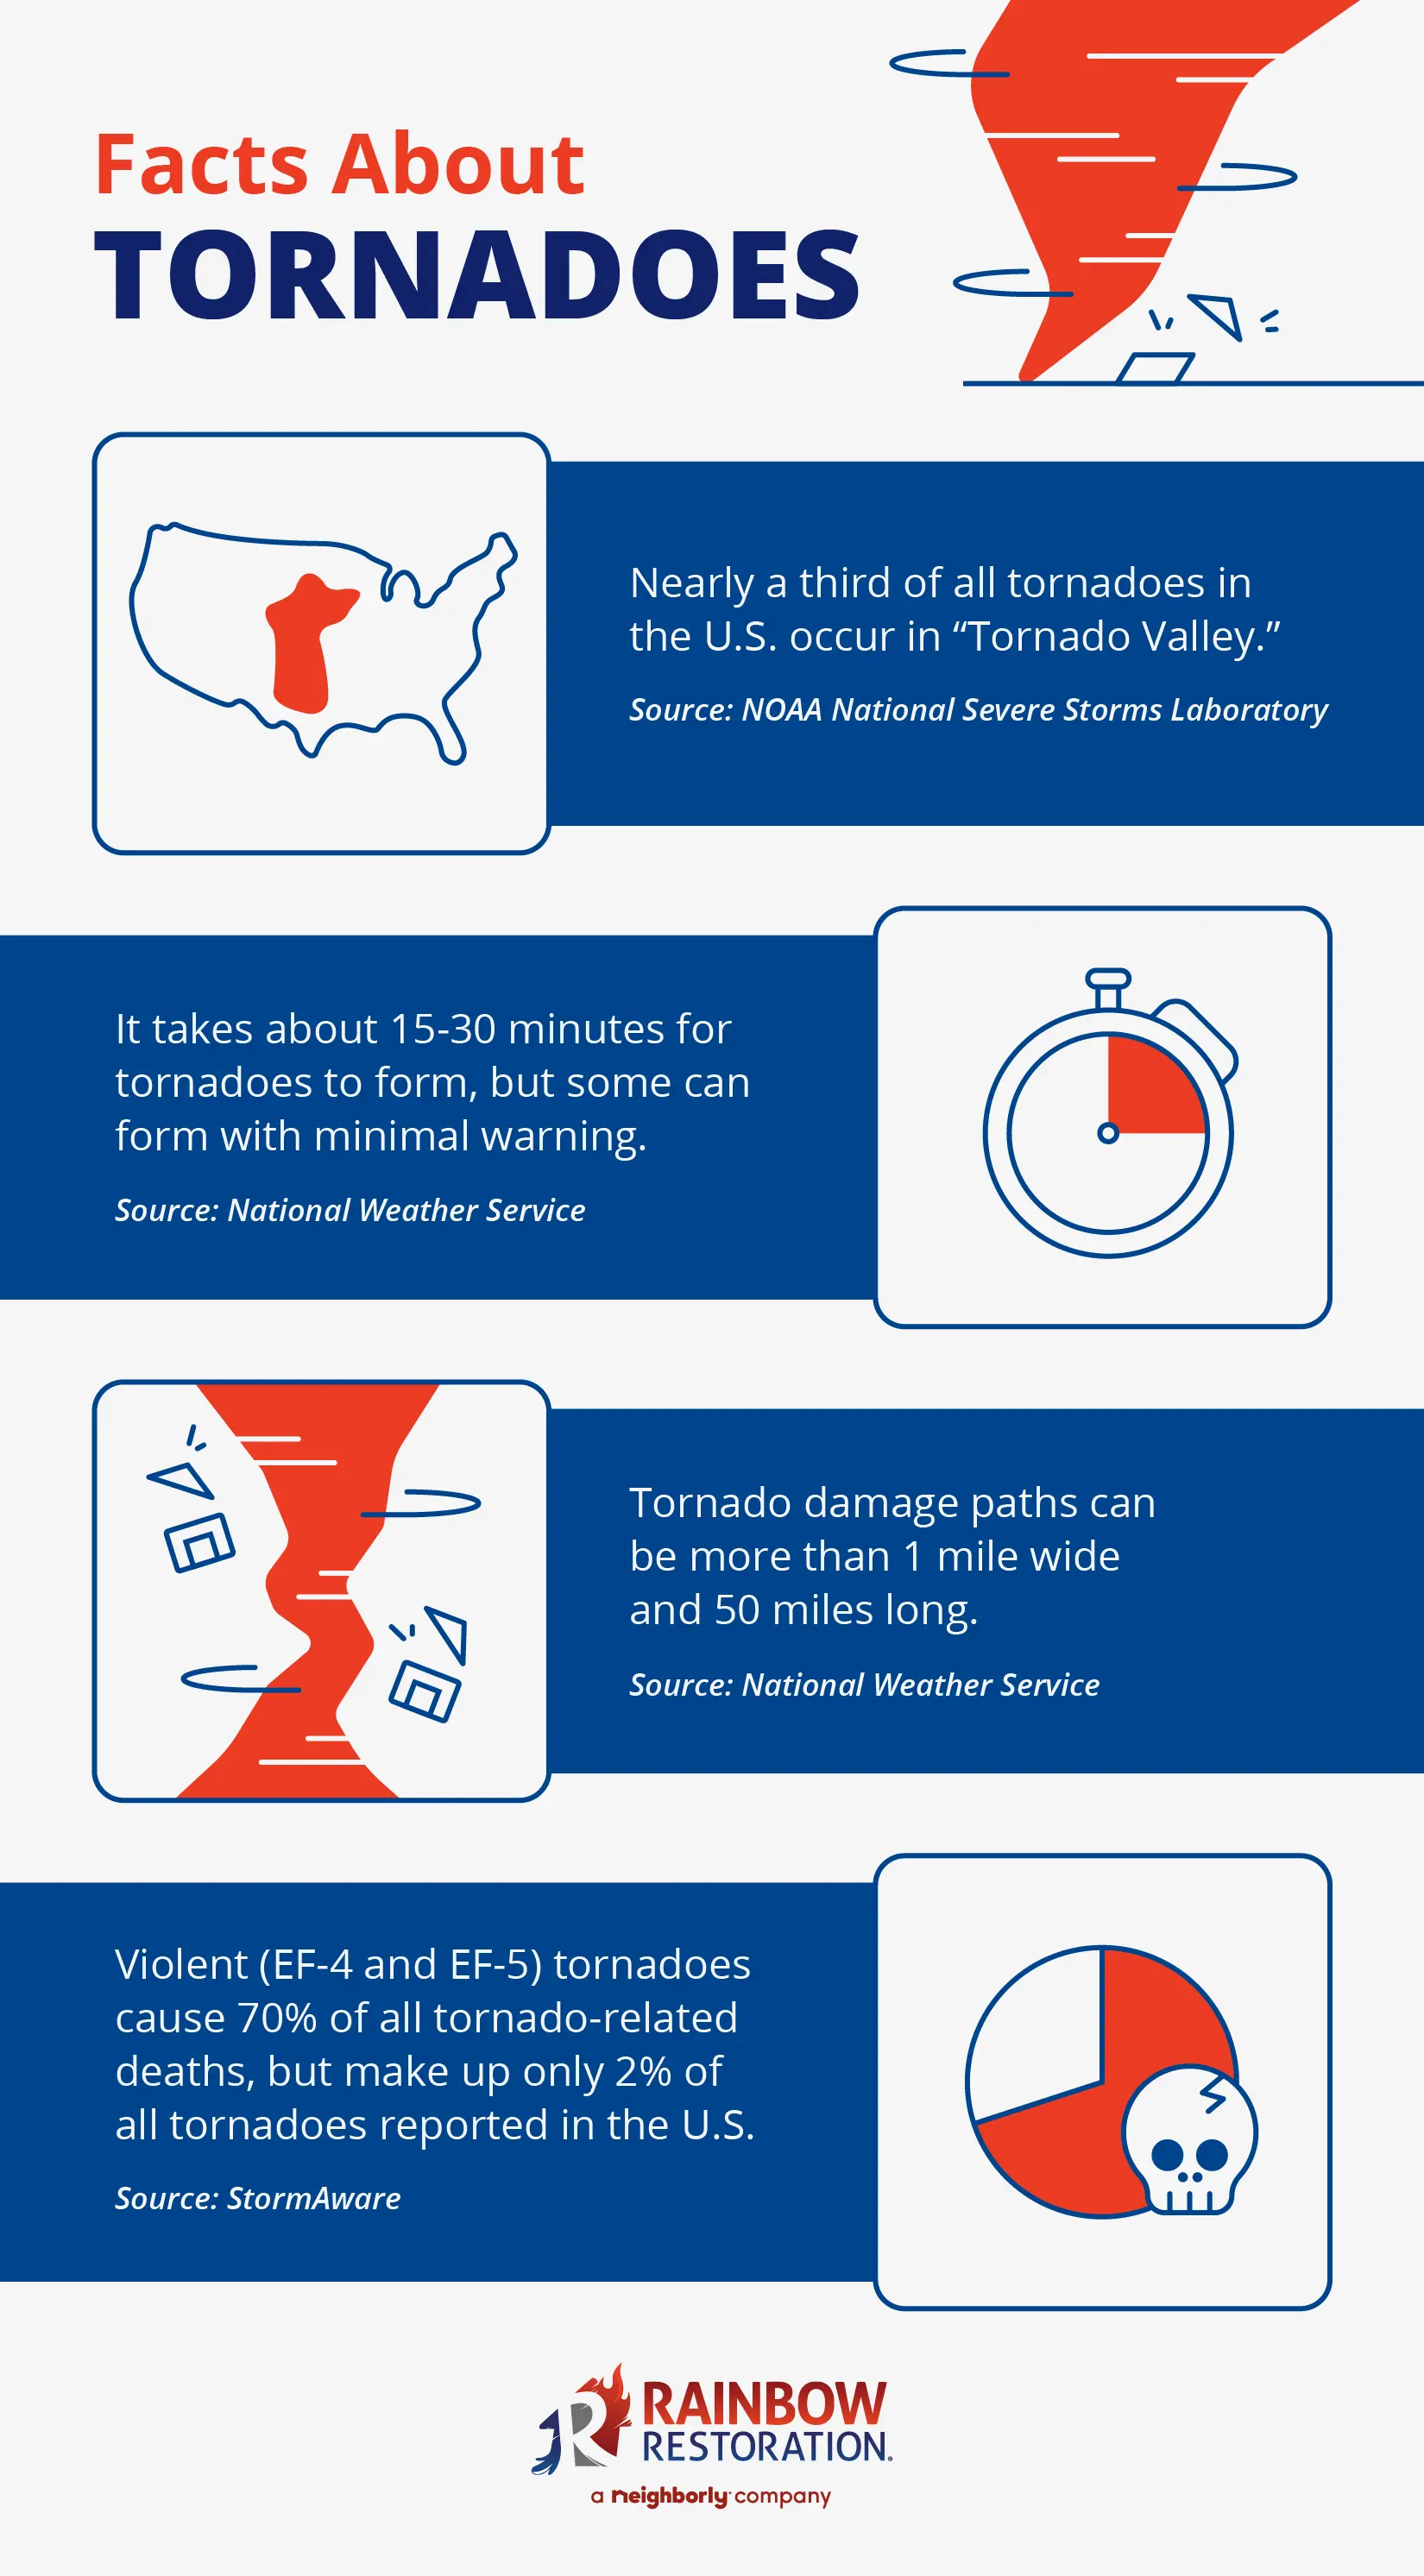 Five facts and statistics about tornadoes.